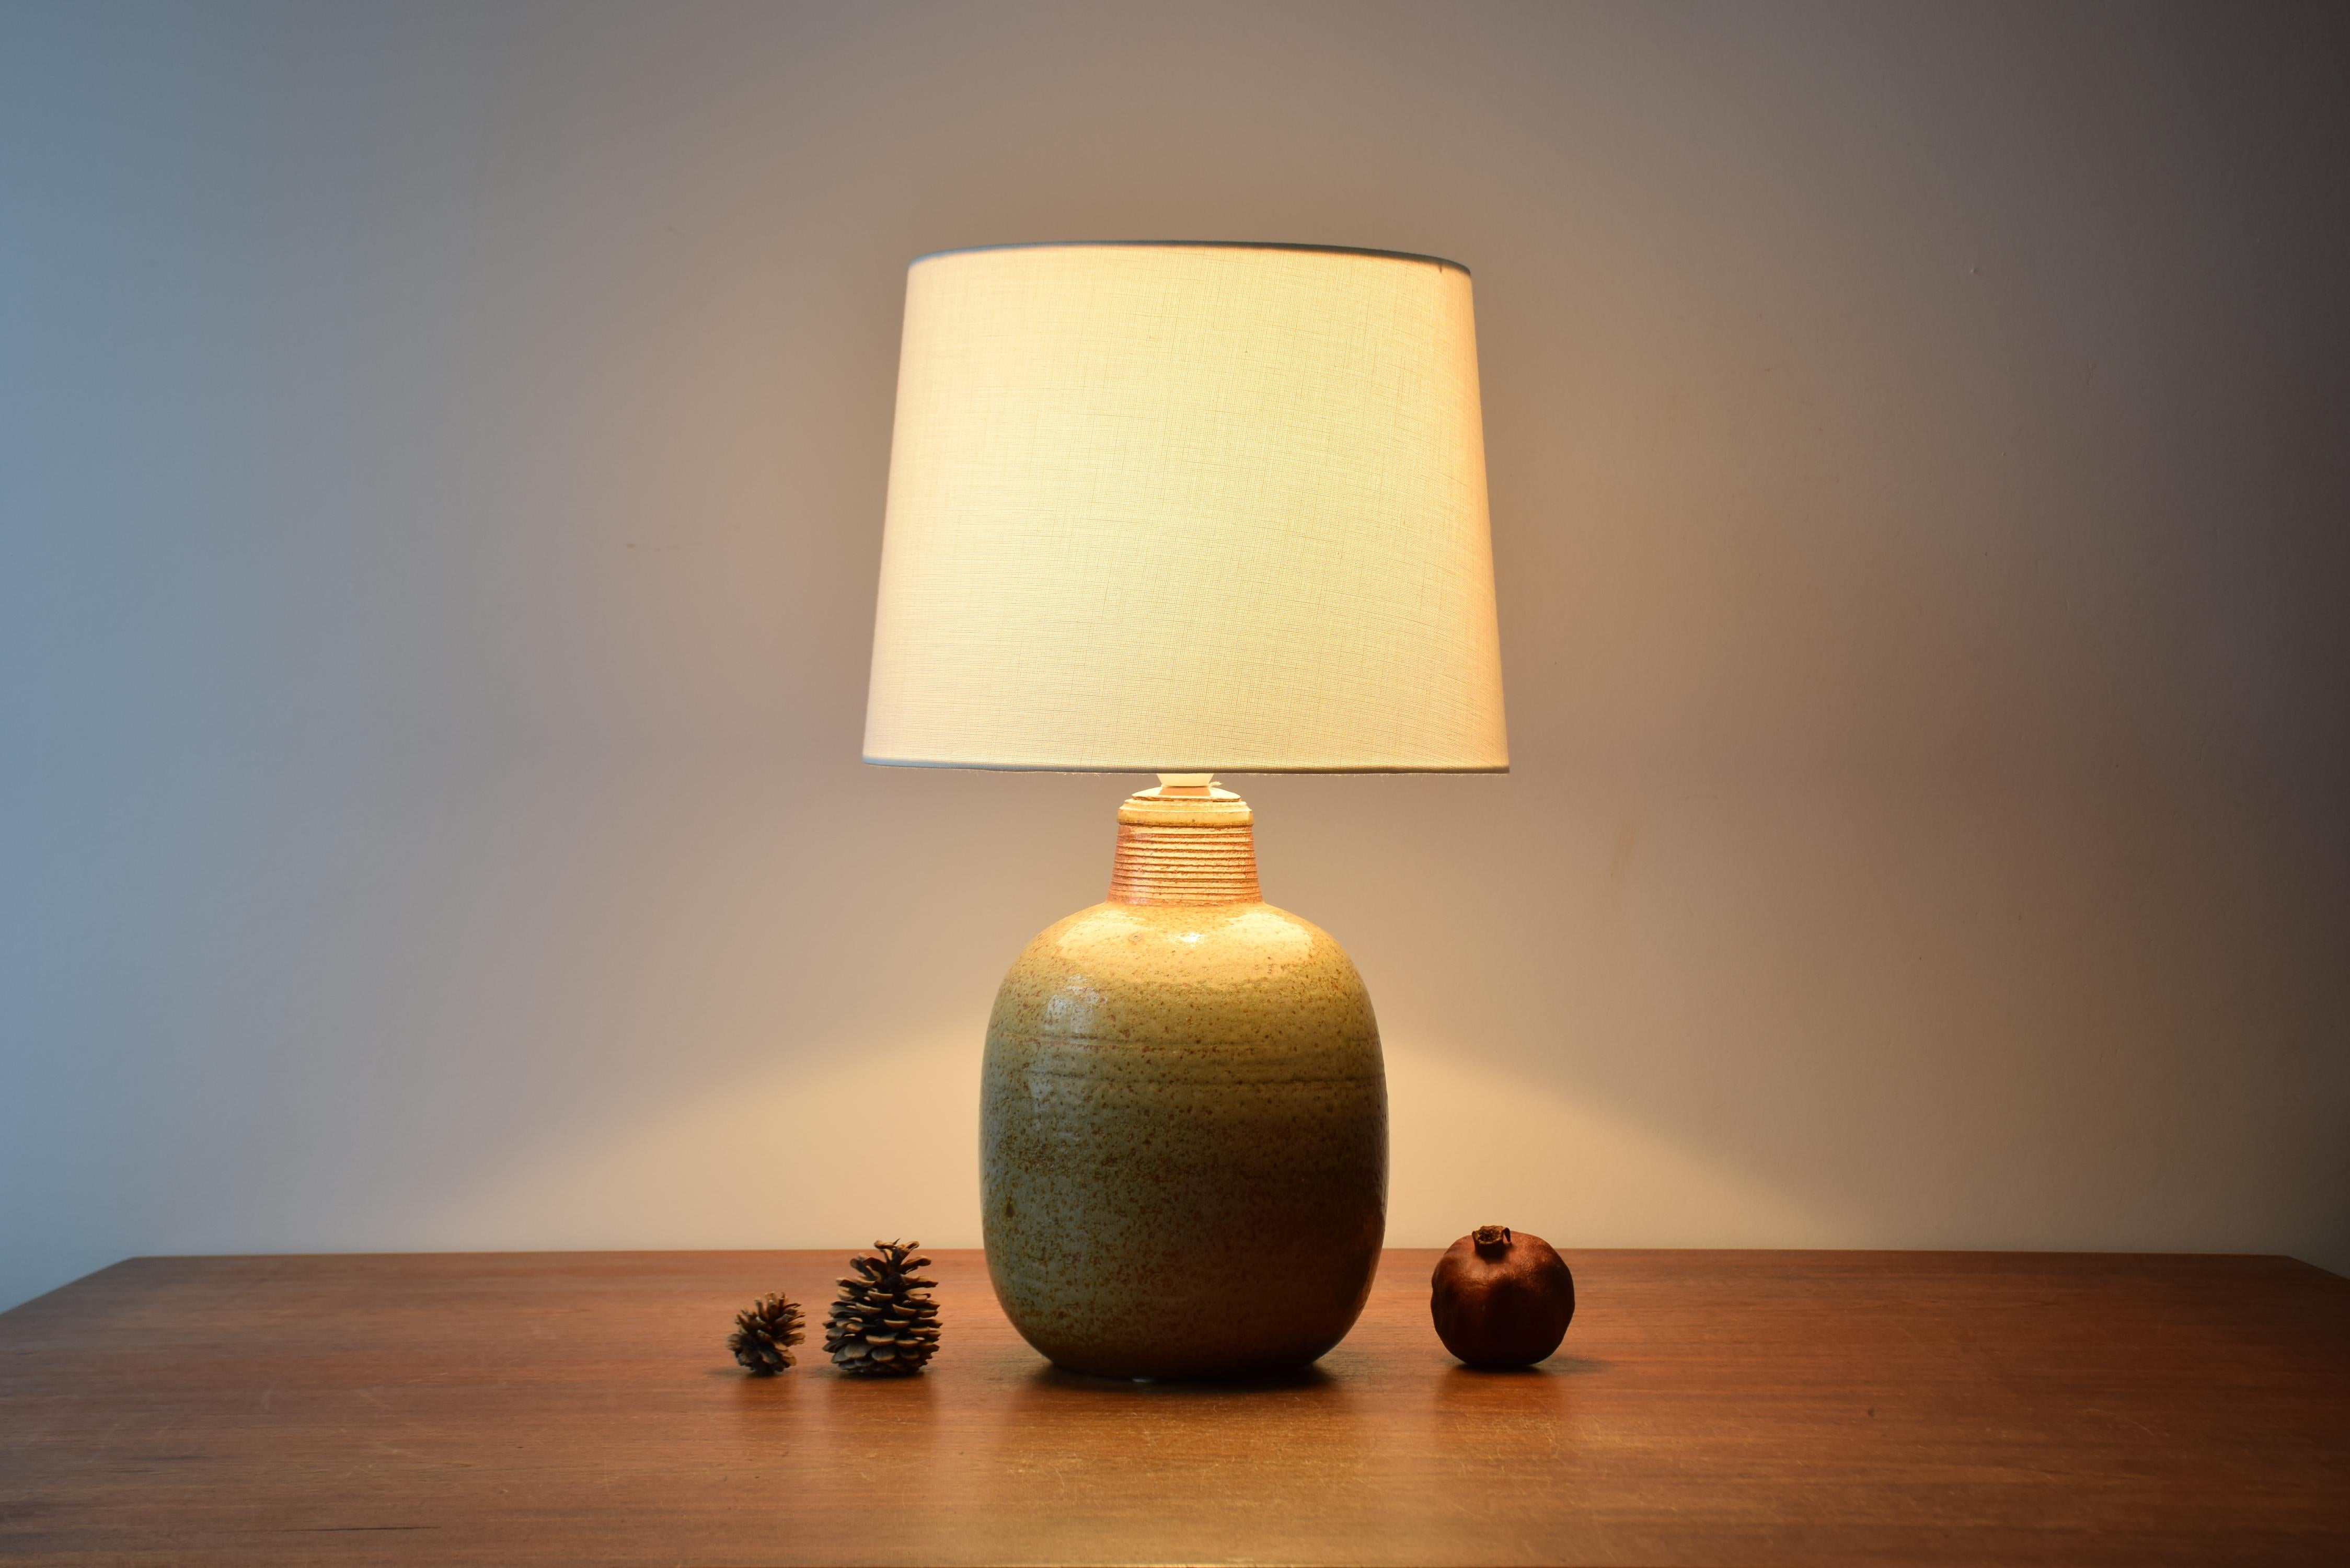 Rare very large table lamp designed by Nils Kähler and made by Herman A. Kähler´s ceramic workshop in Denmark ca 1960s. The beige glaze is slightly greenish and very vivid with darker elements.

Included is a new lampshade designed and made in